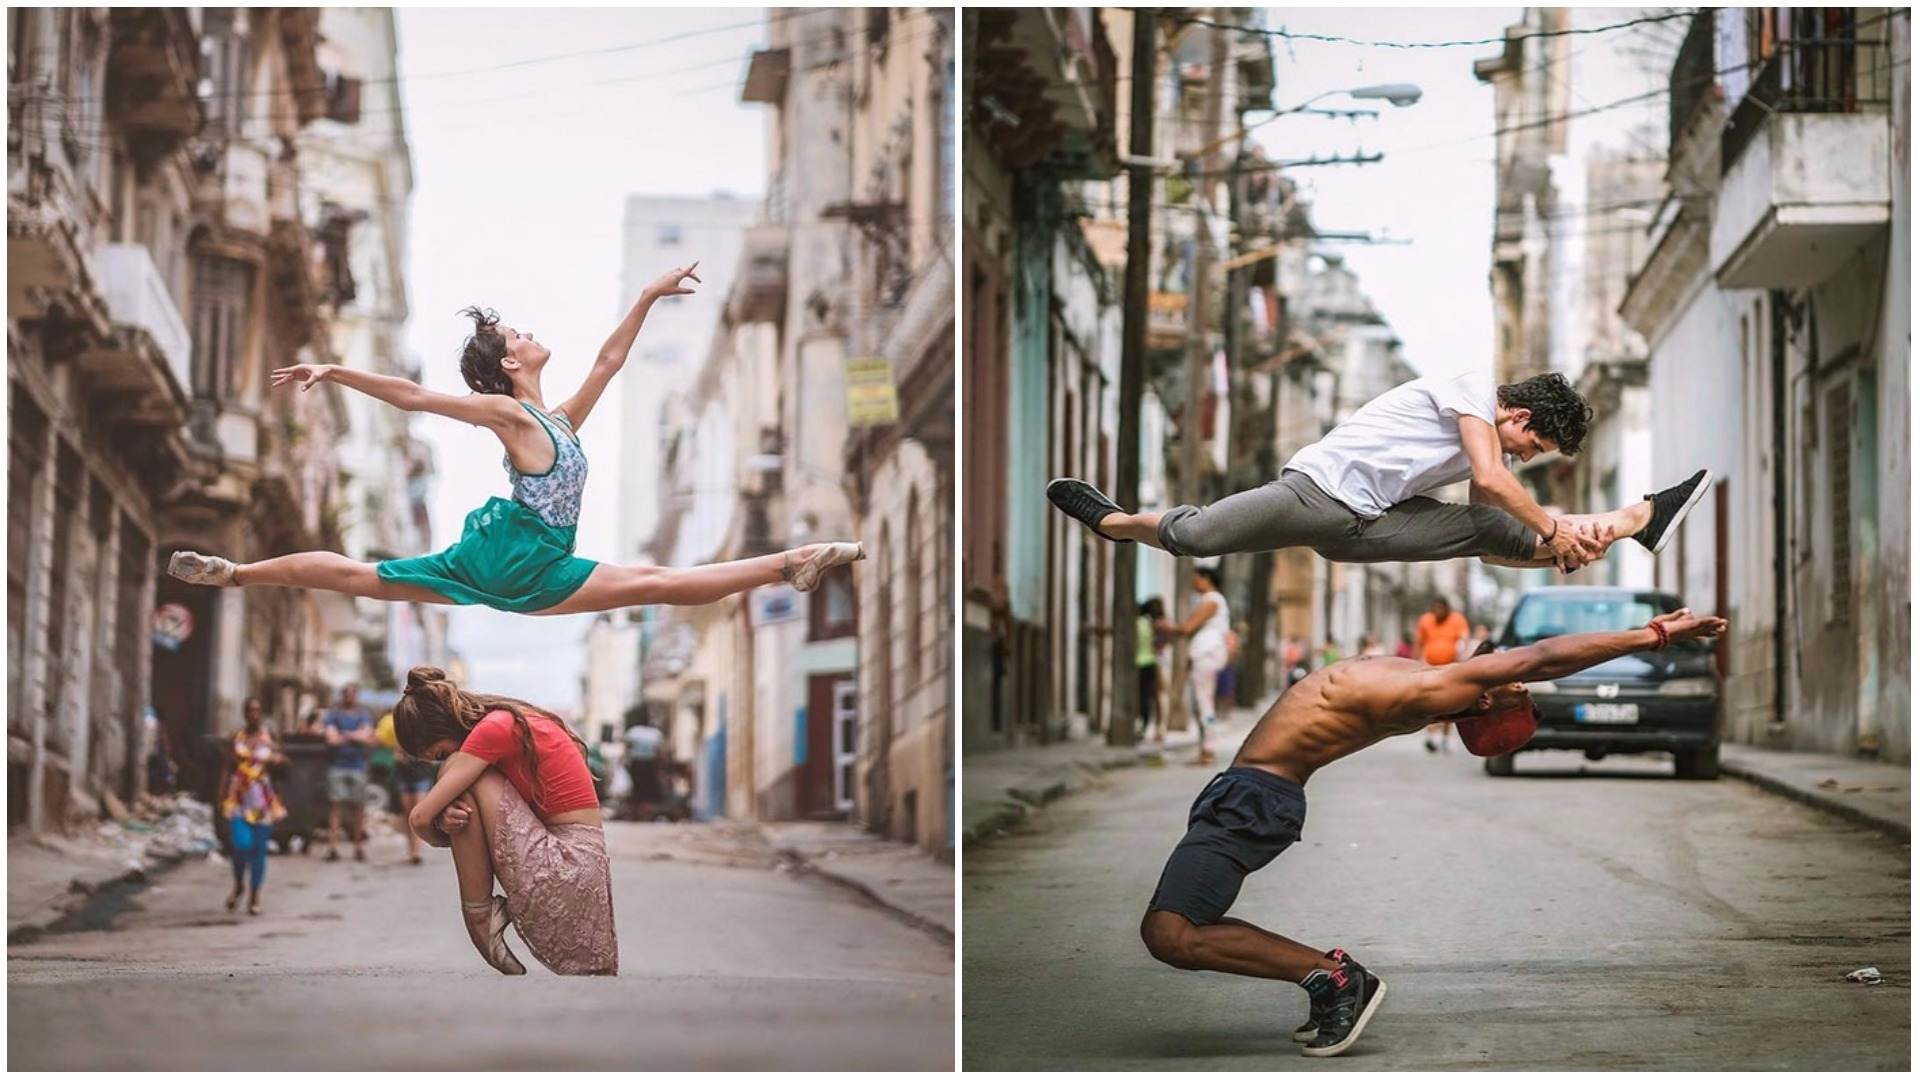 Ballet Dancers Practicing On The Streets Of Cuba (22 Pics)